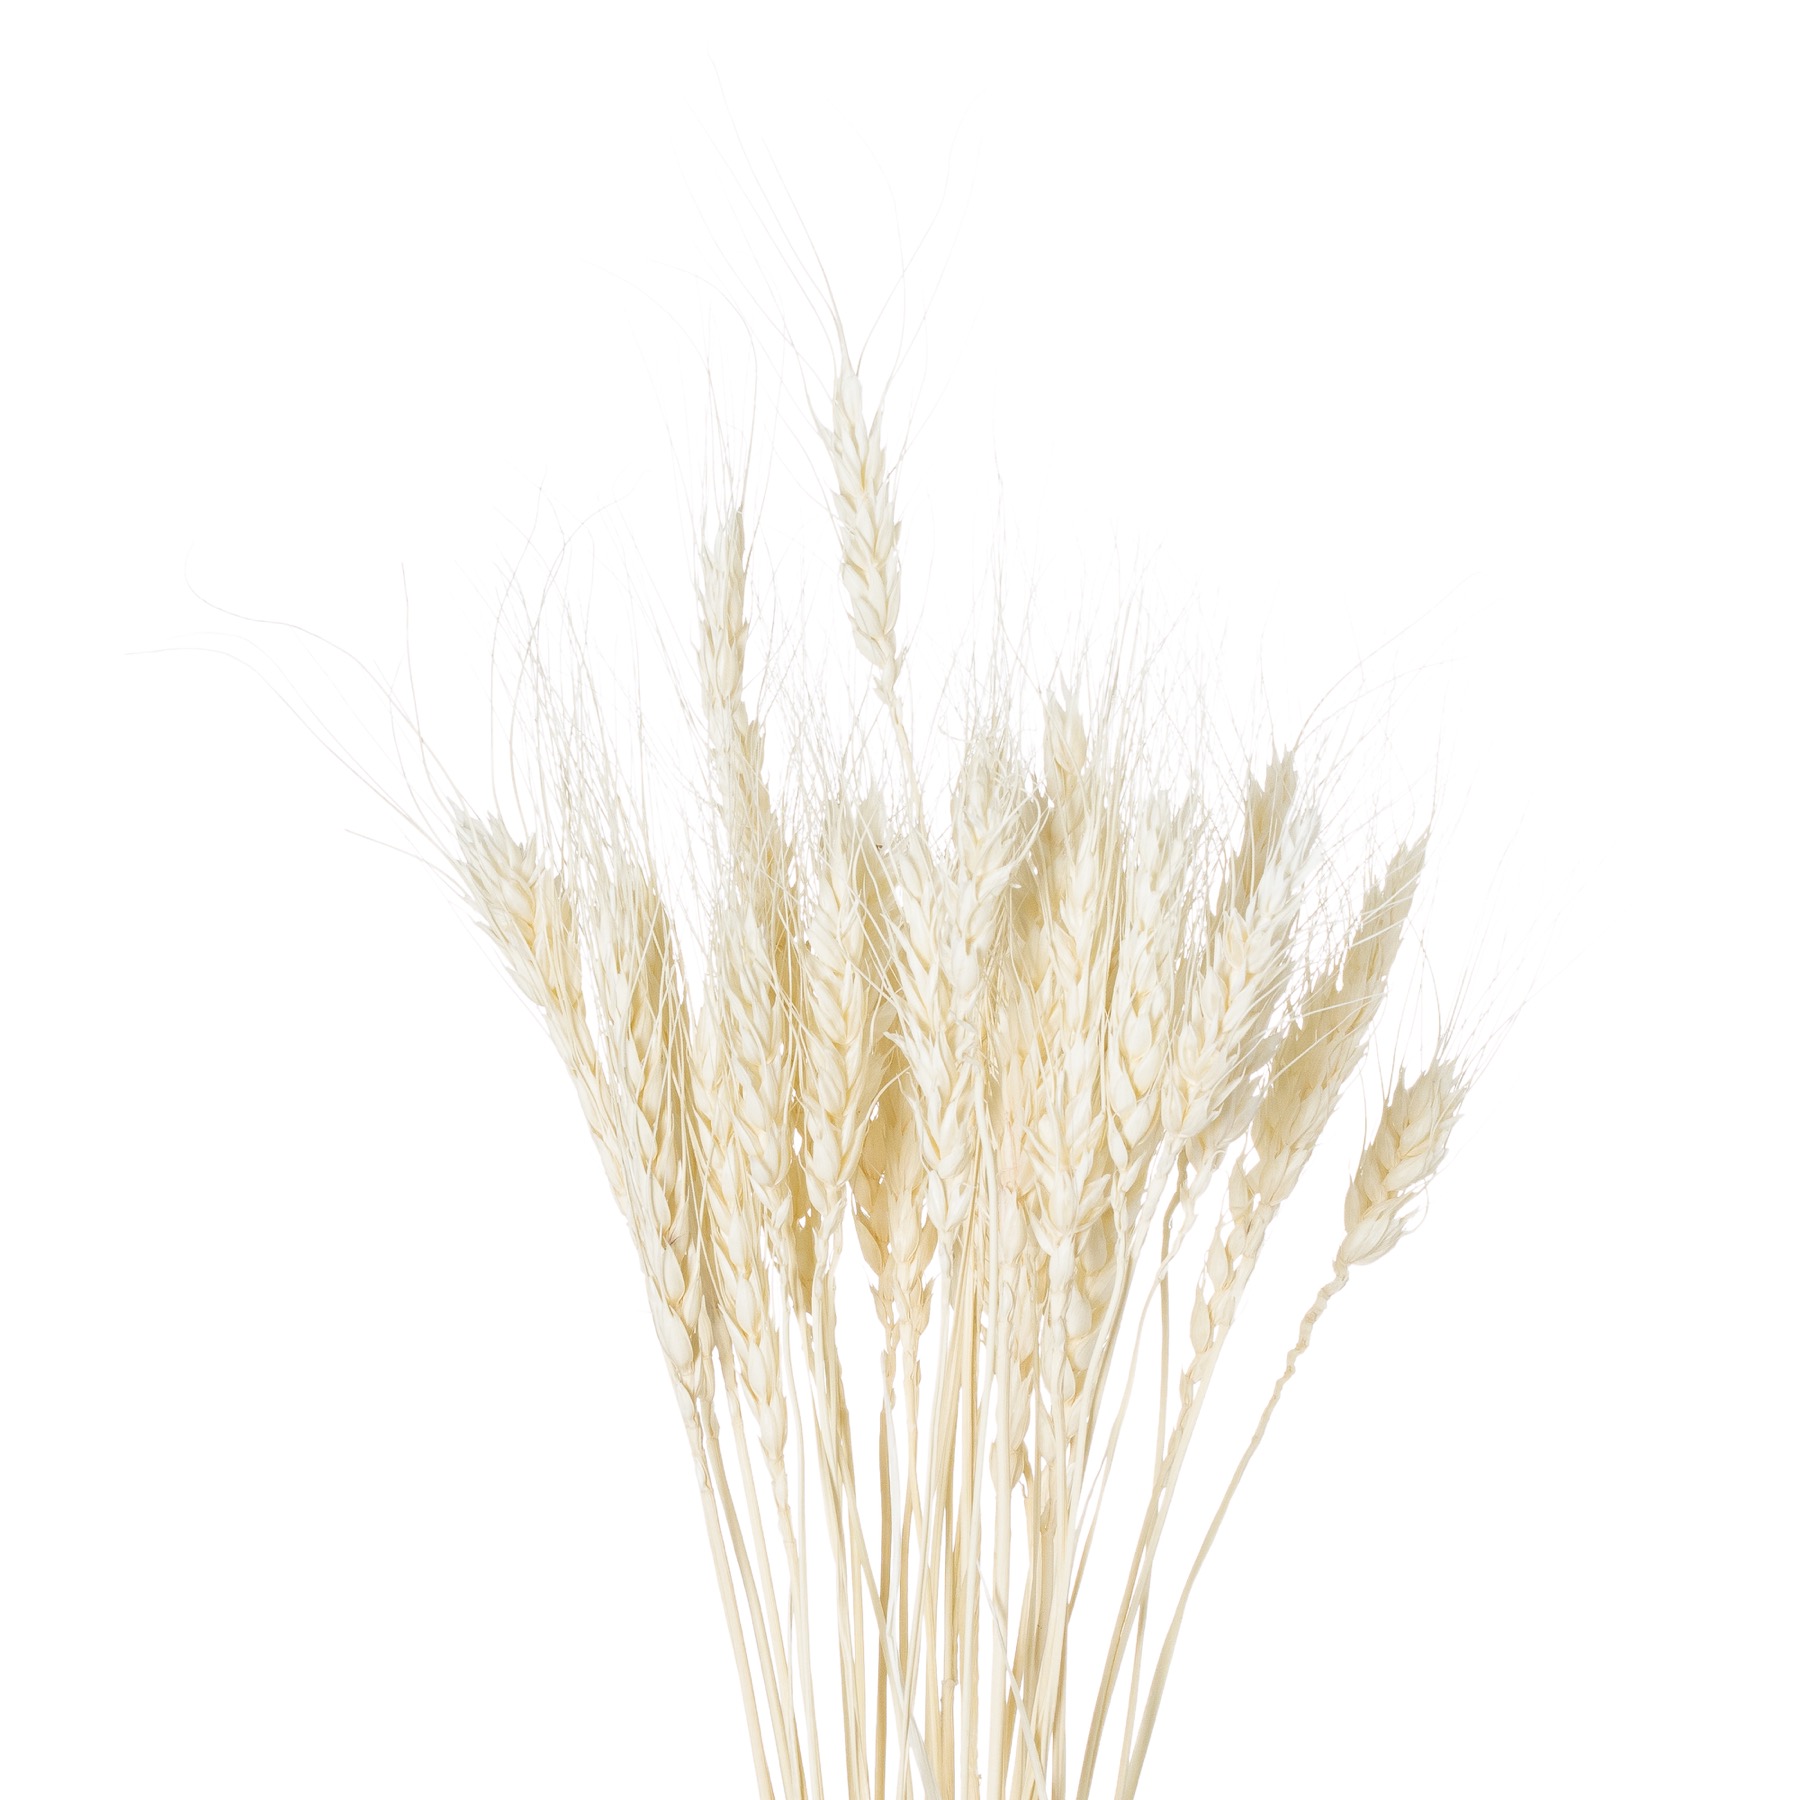 Dried White Wheat Bunch Of 20 - Image 1